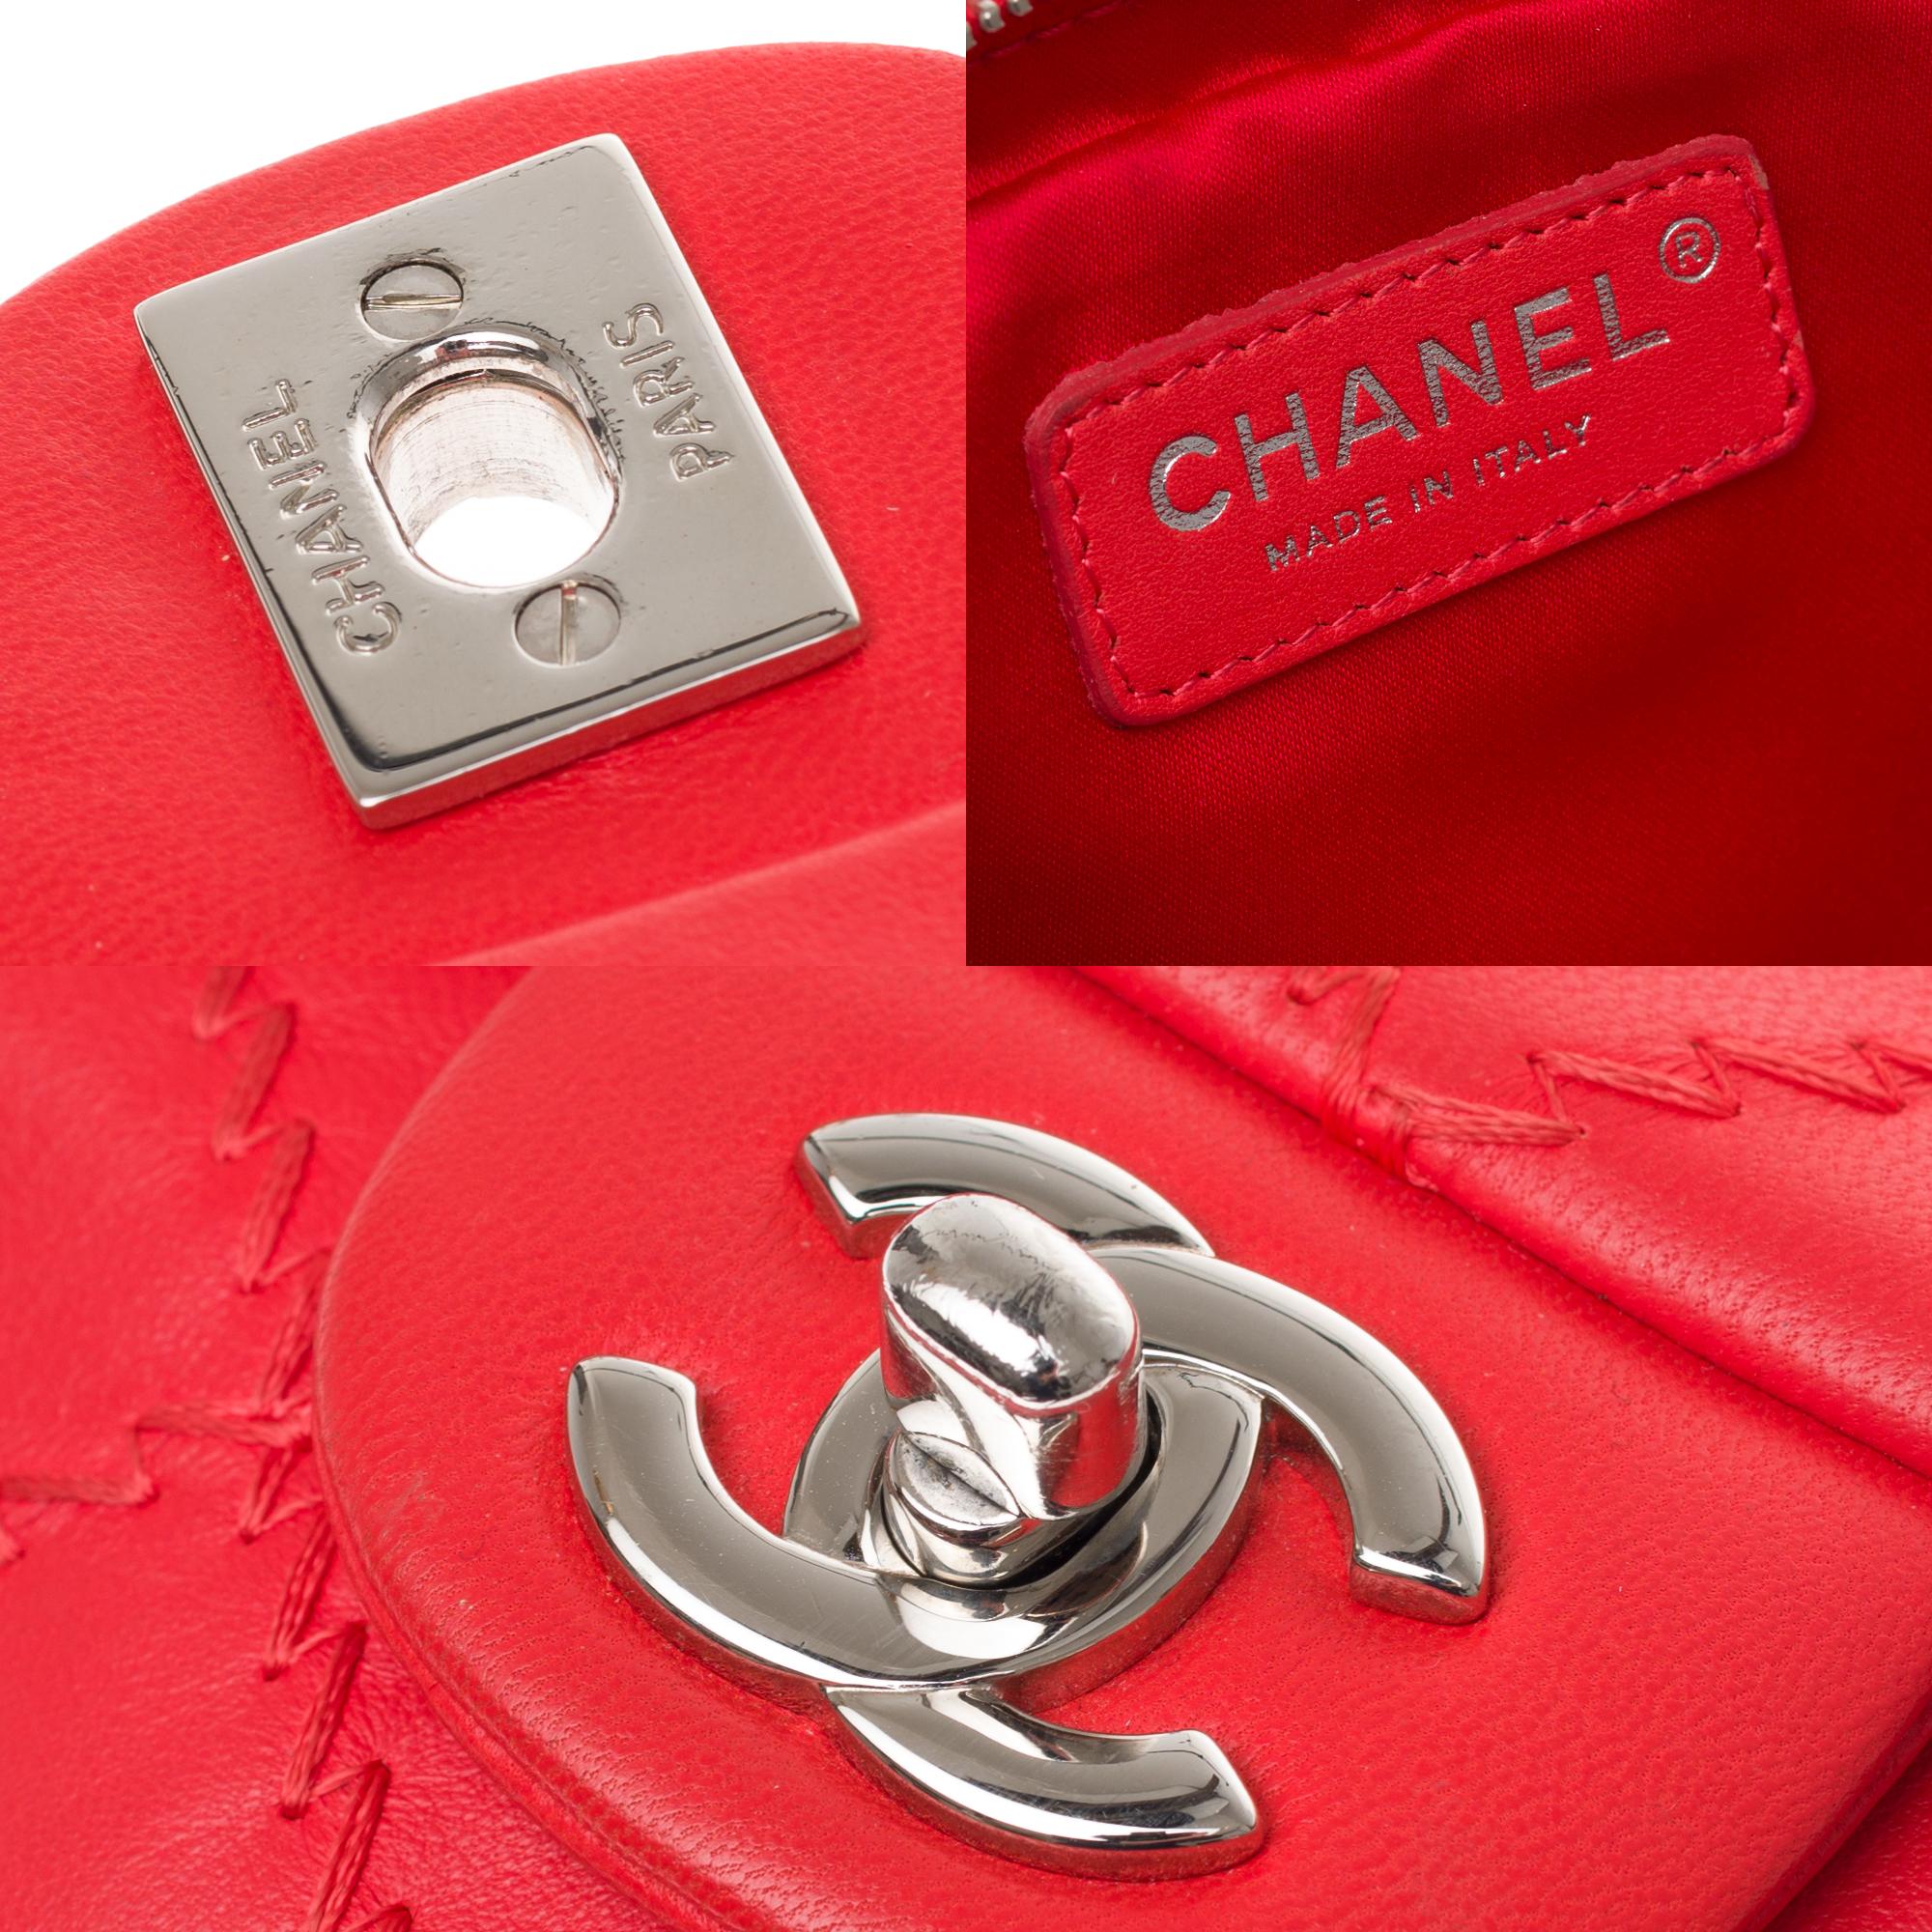 Women's Amazing chanel Purse/Wallet in red leather and silver hardware